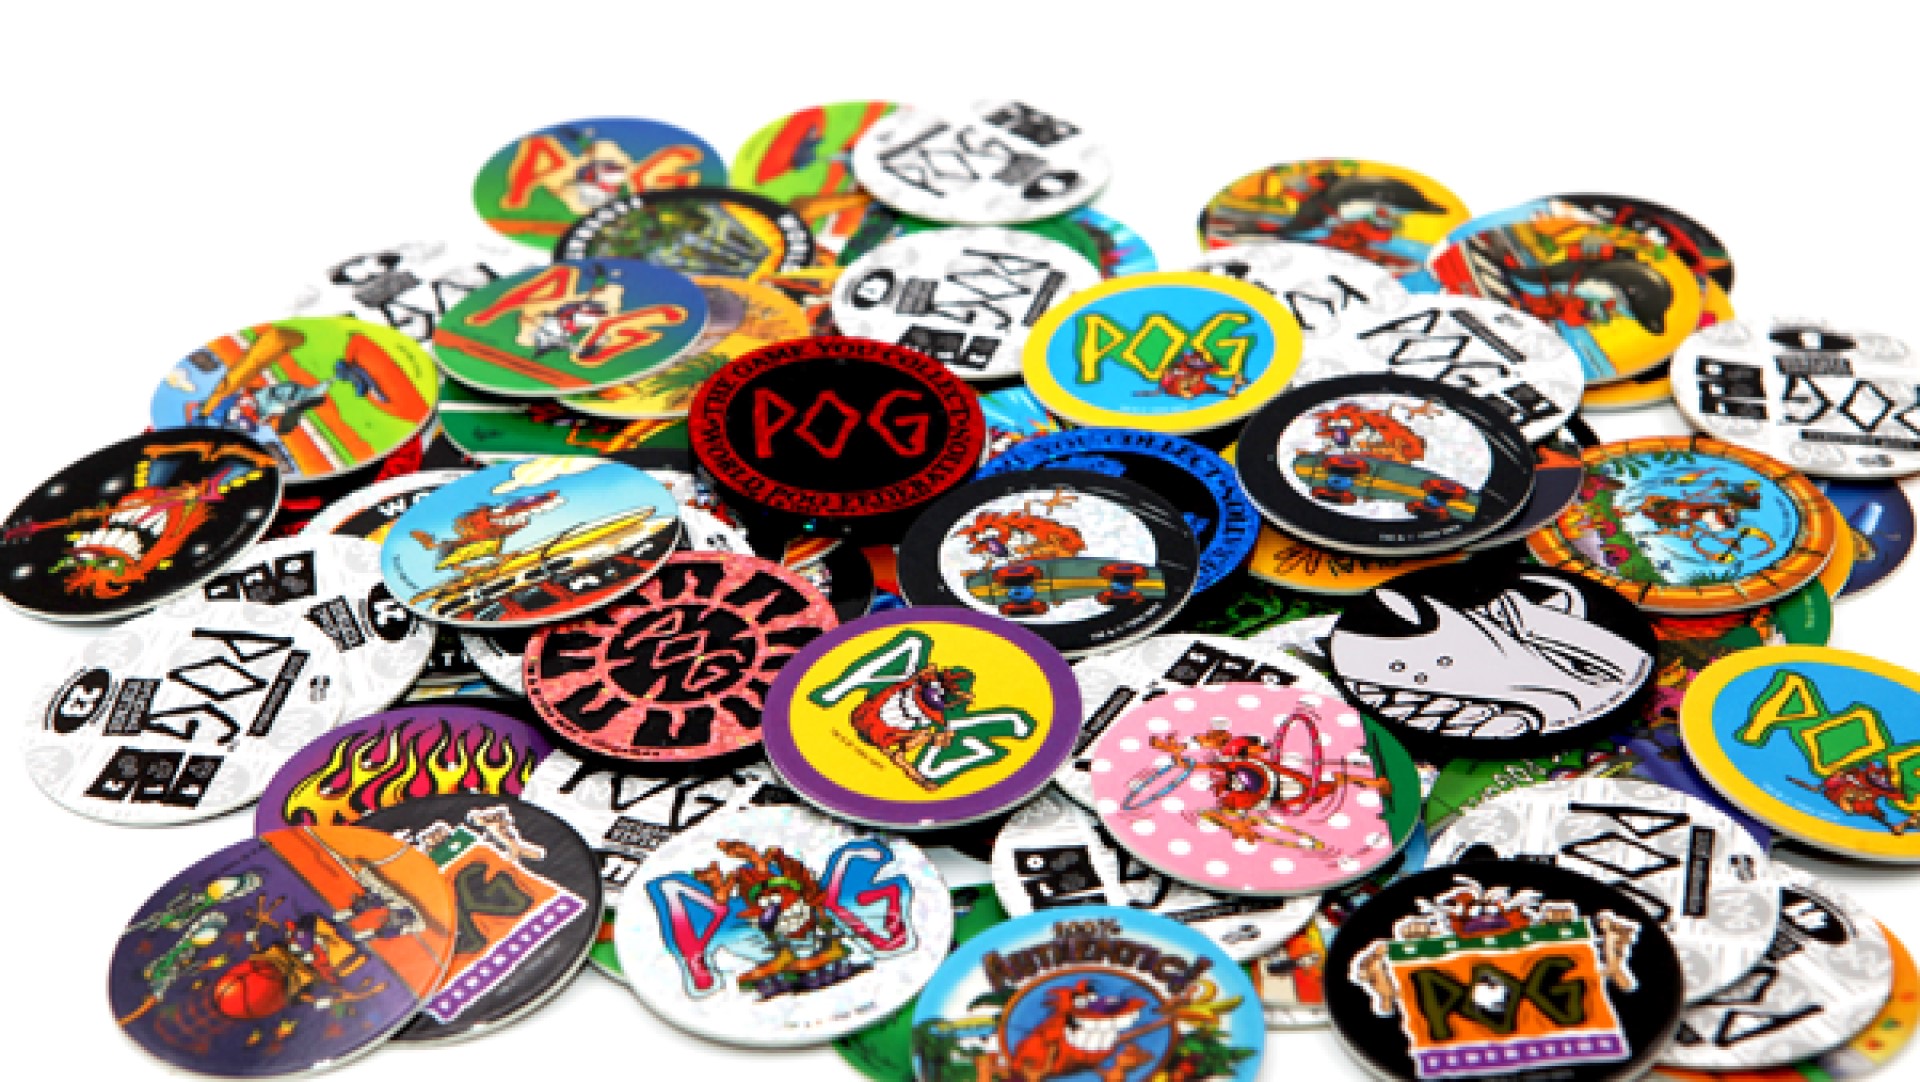 How to play POGS! 